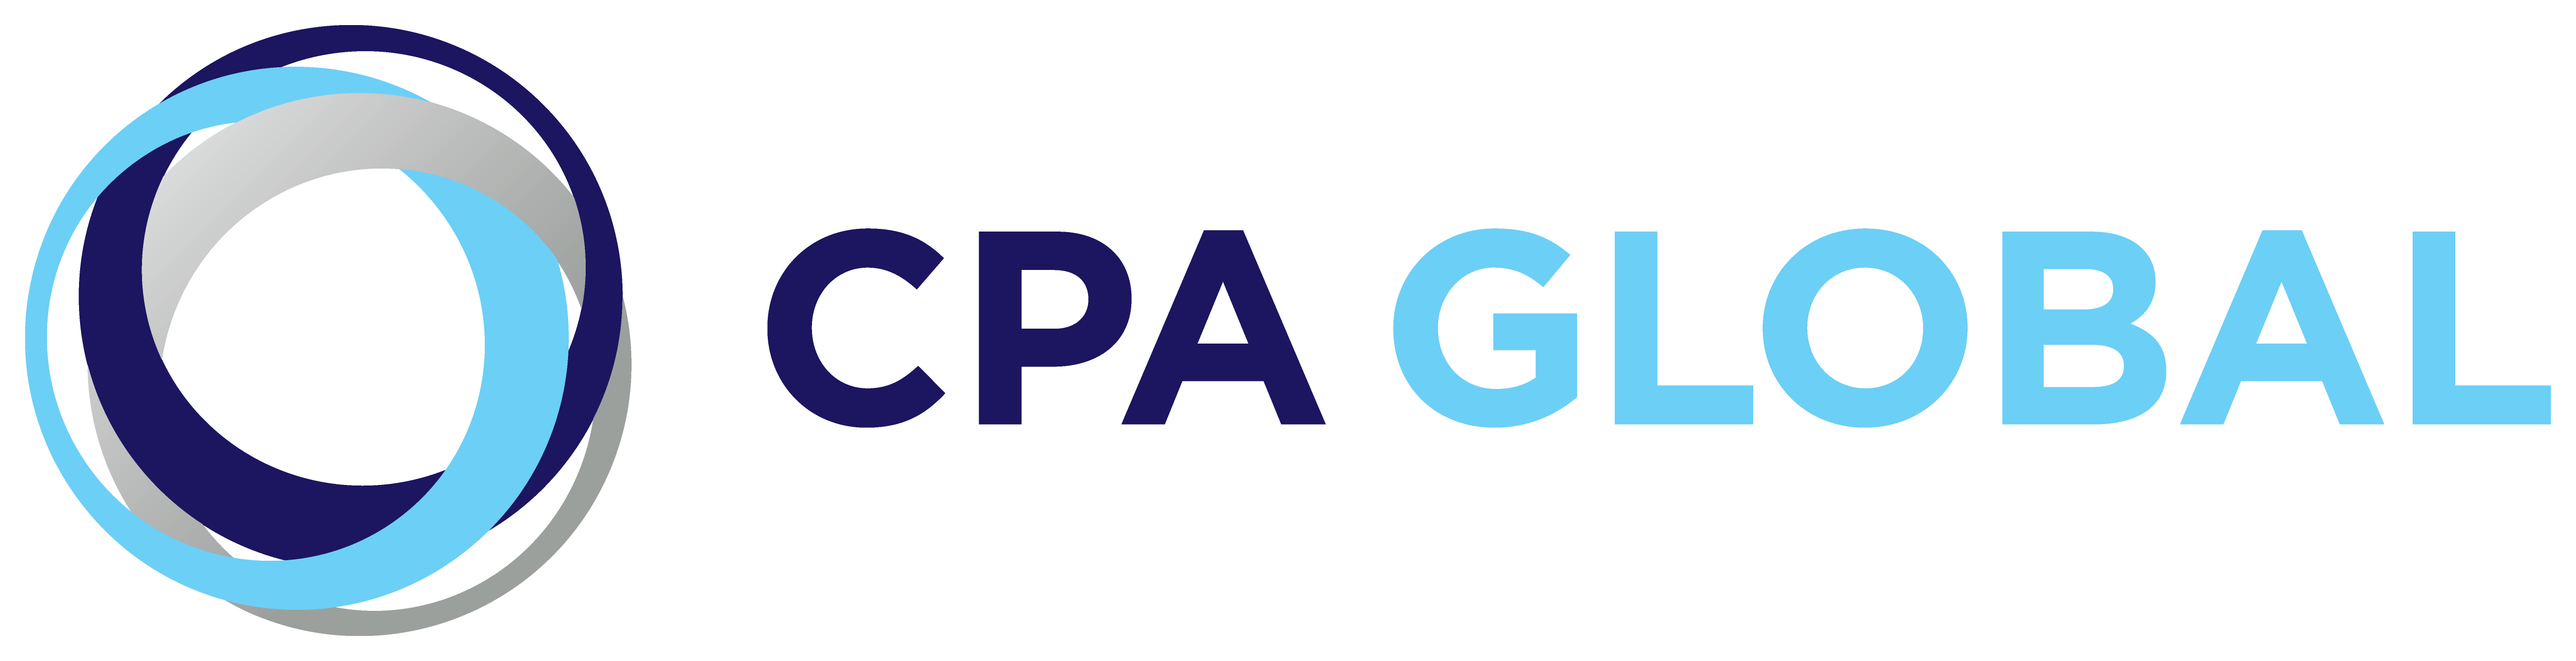 CPA Logo - File:CPA Global logo.png - Wikimedia Commons